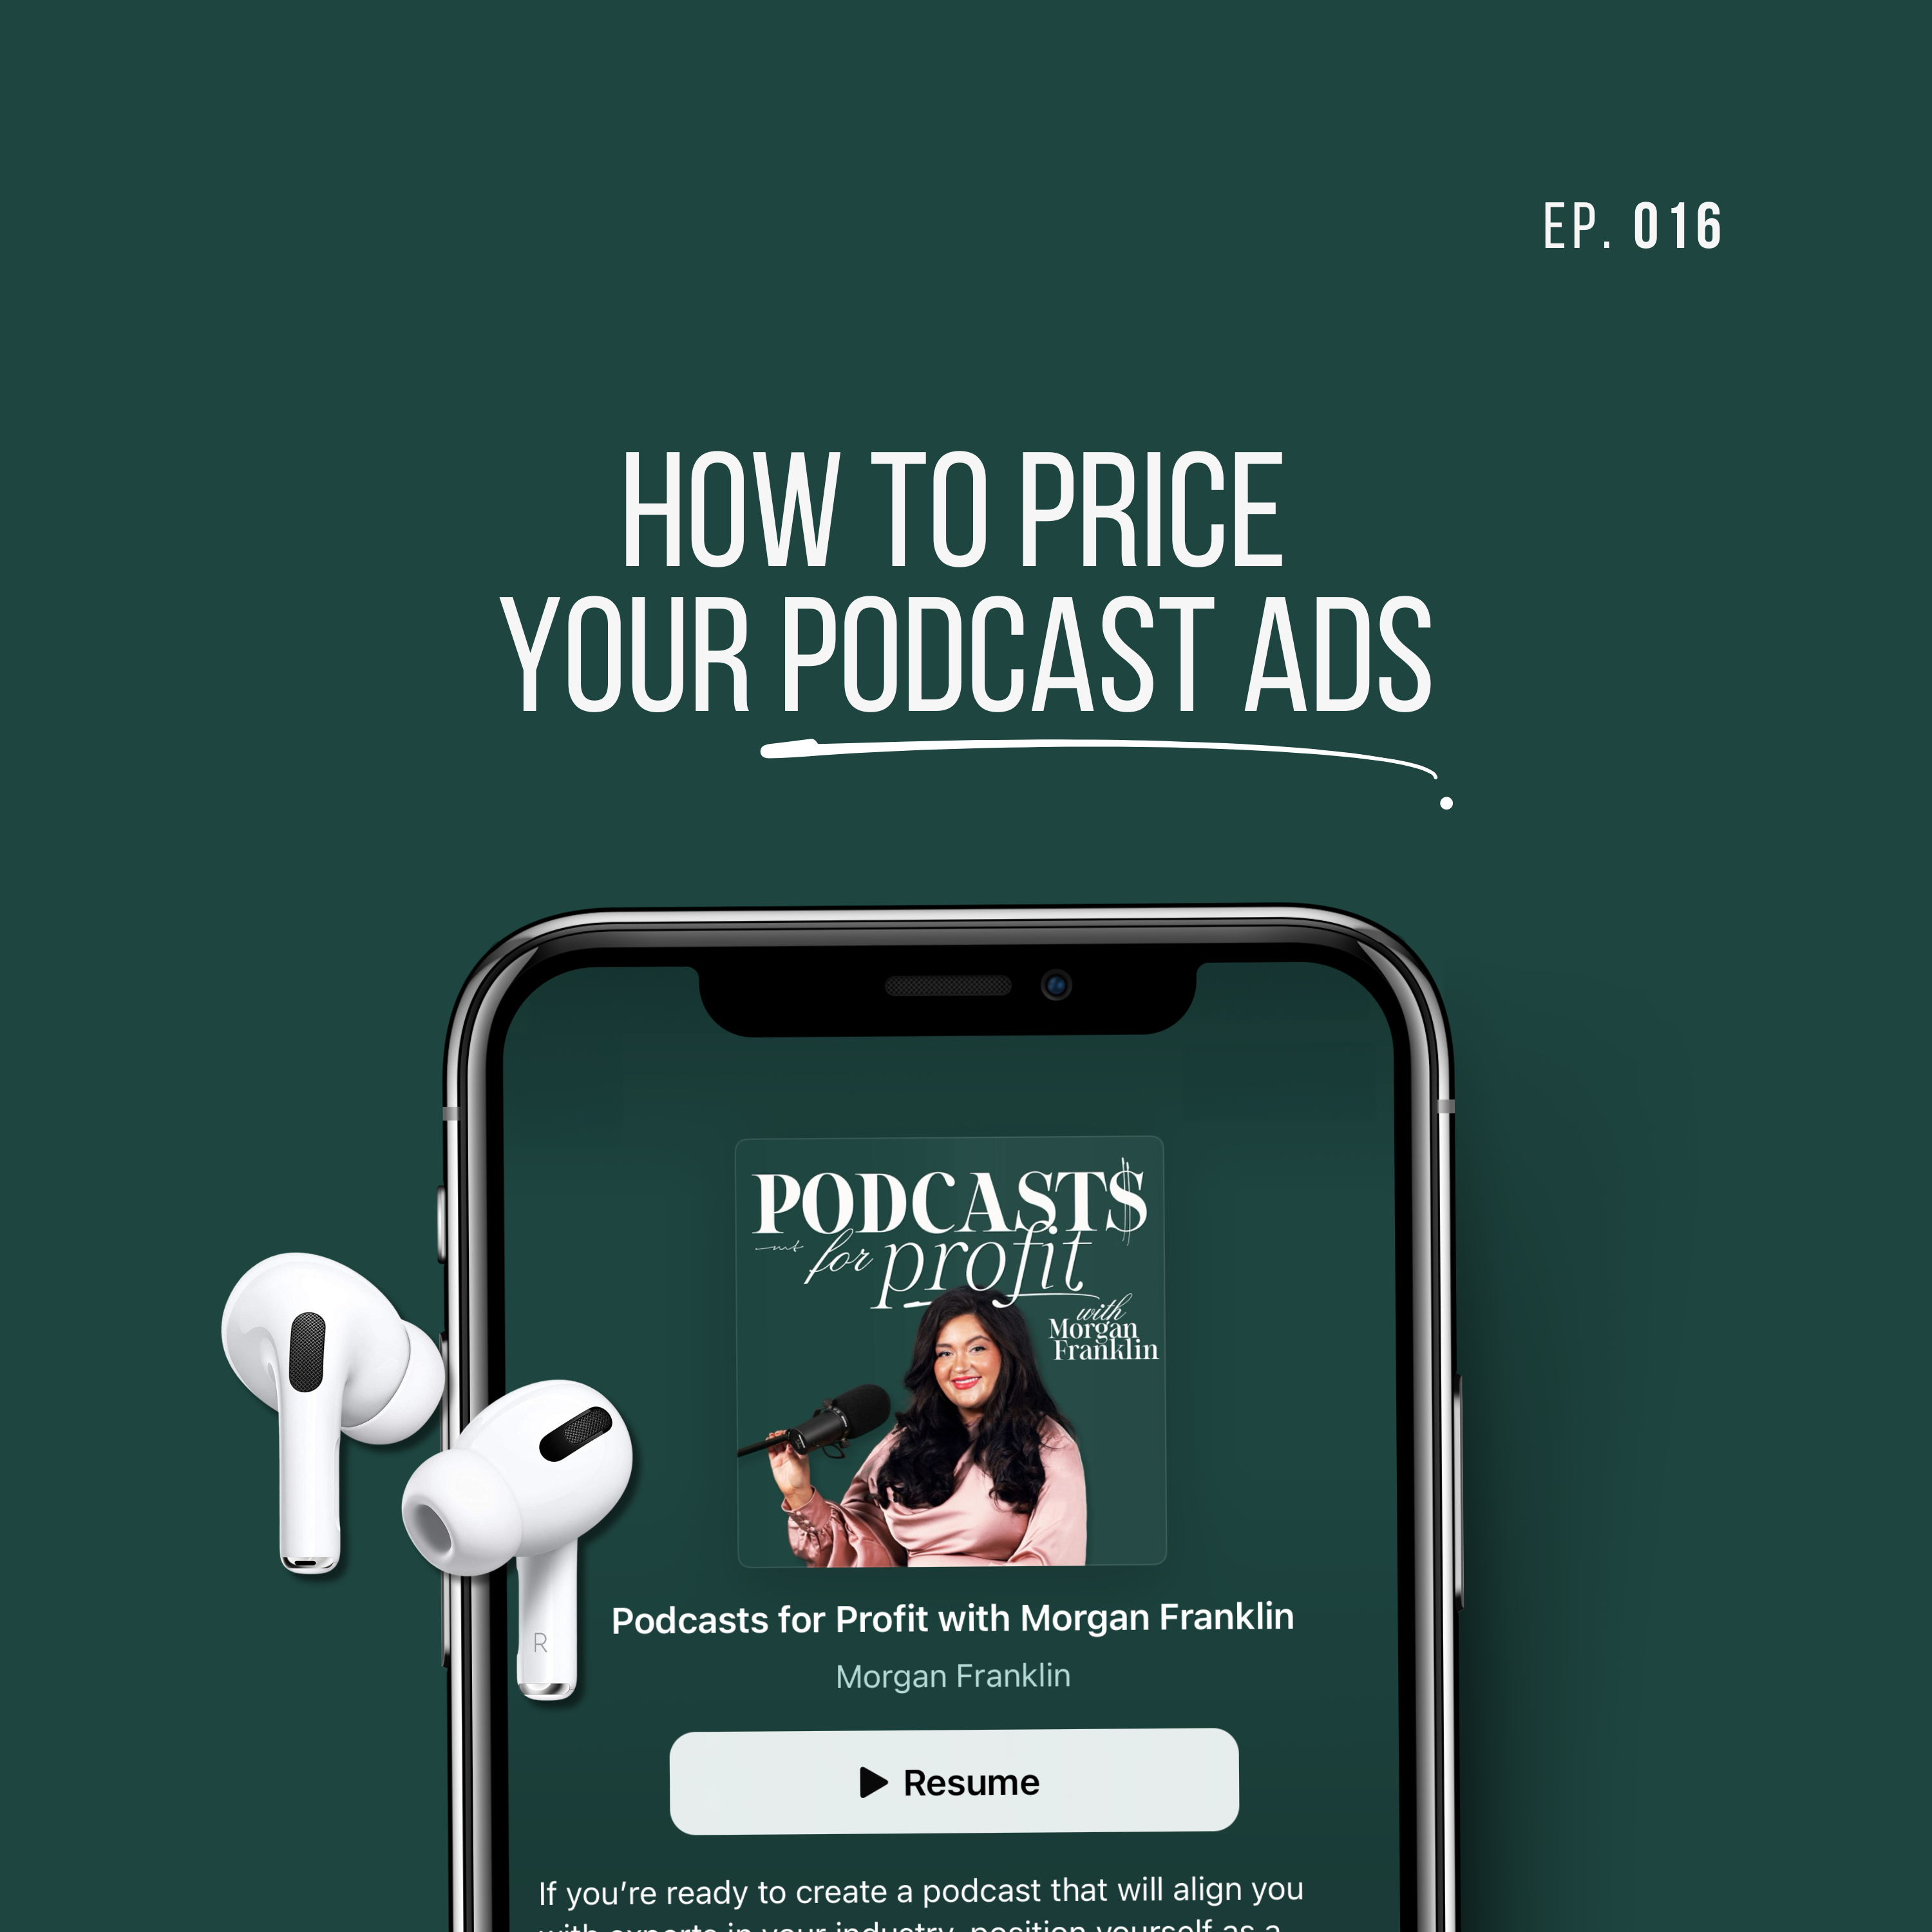 How to Price Podcast Ads